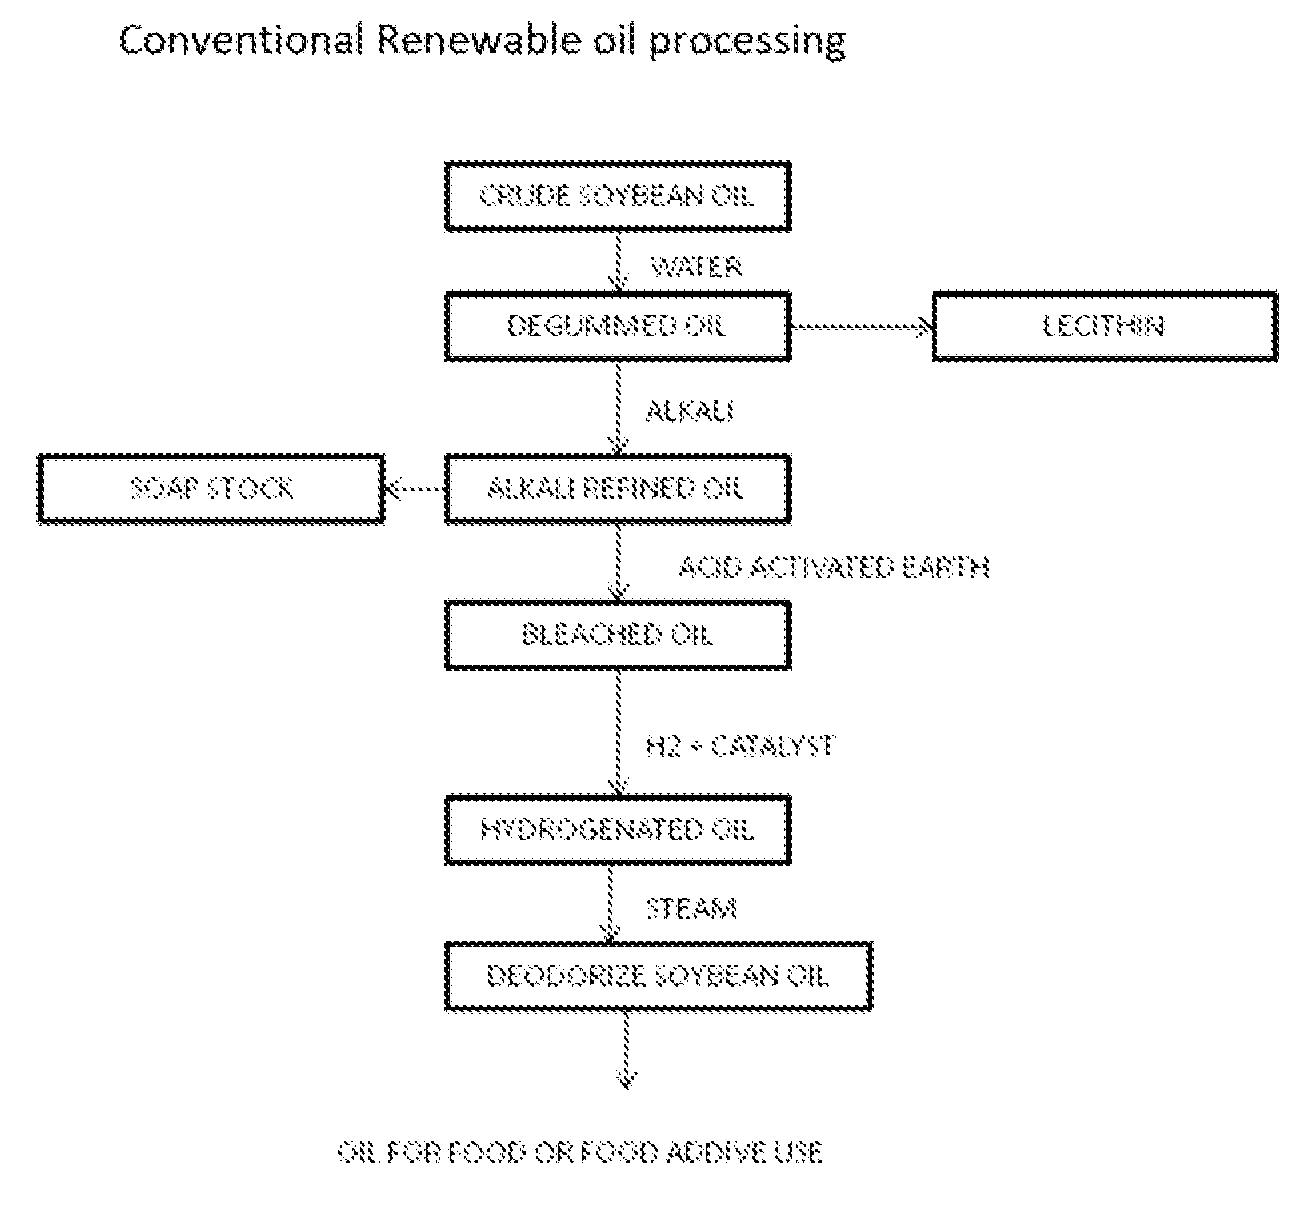 Process for upgrading low value renewable oils